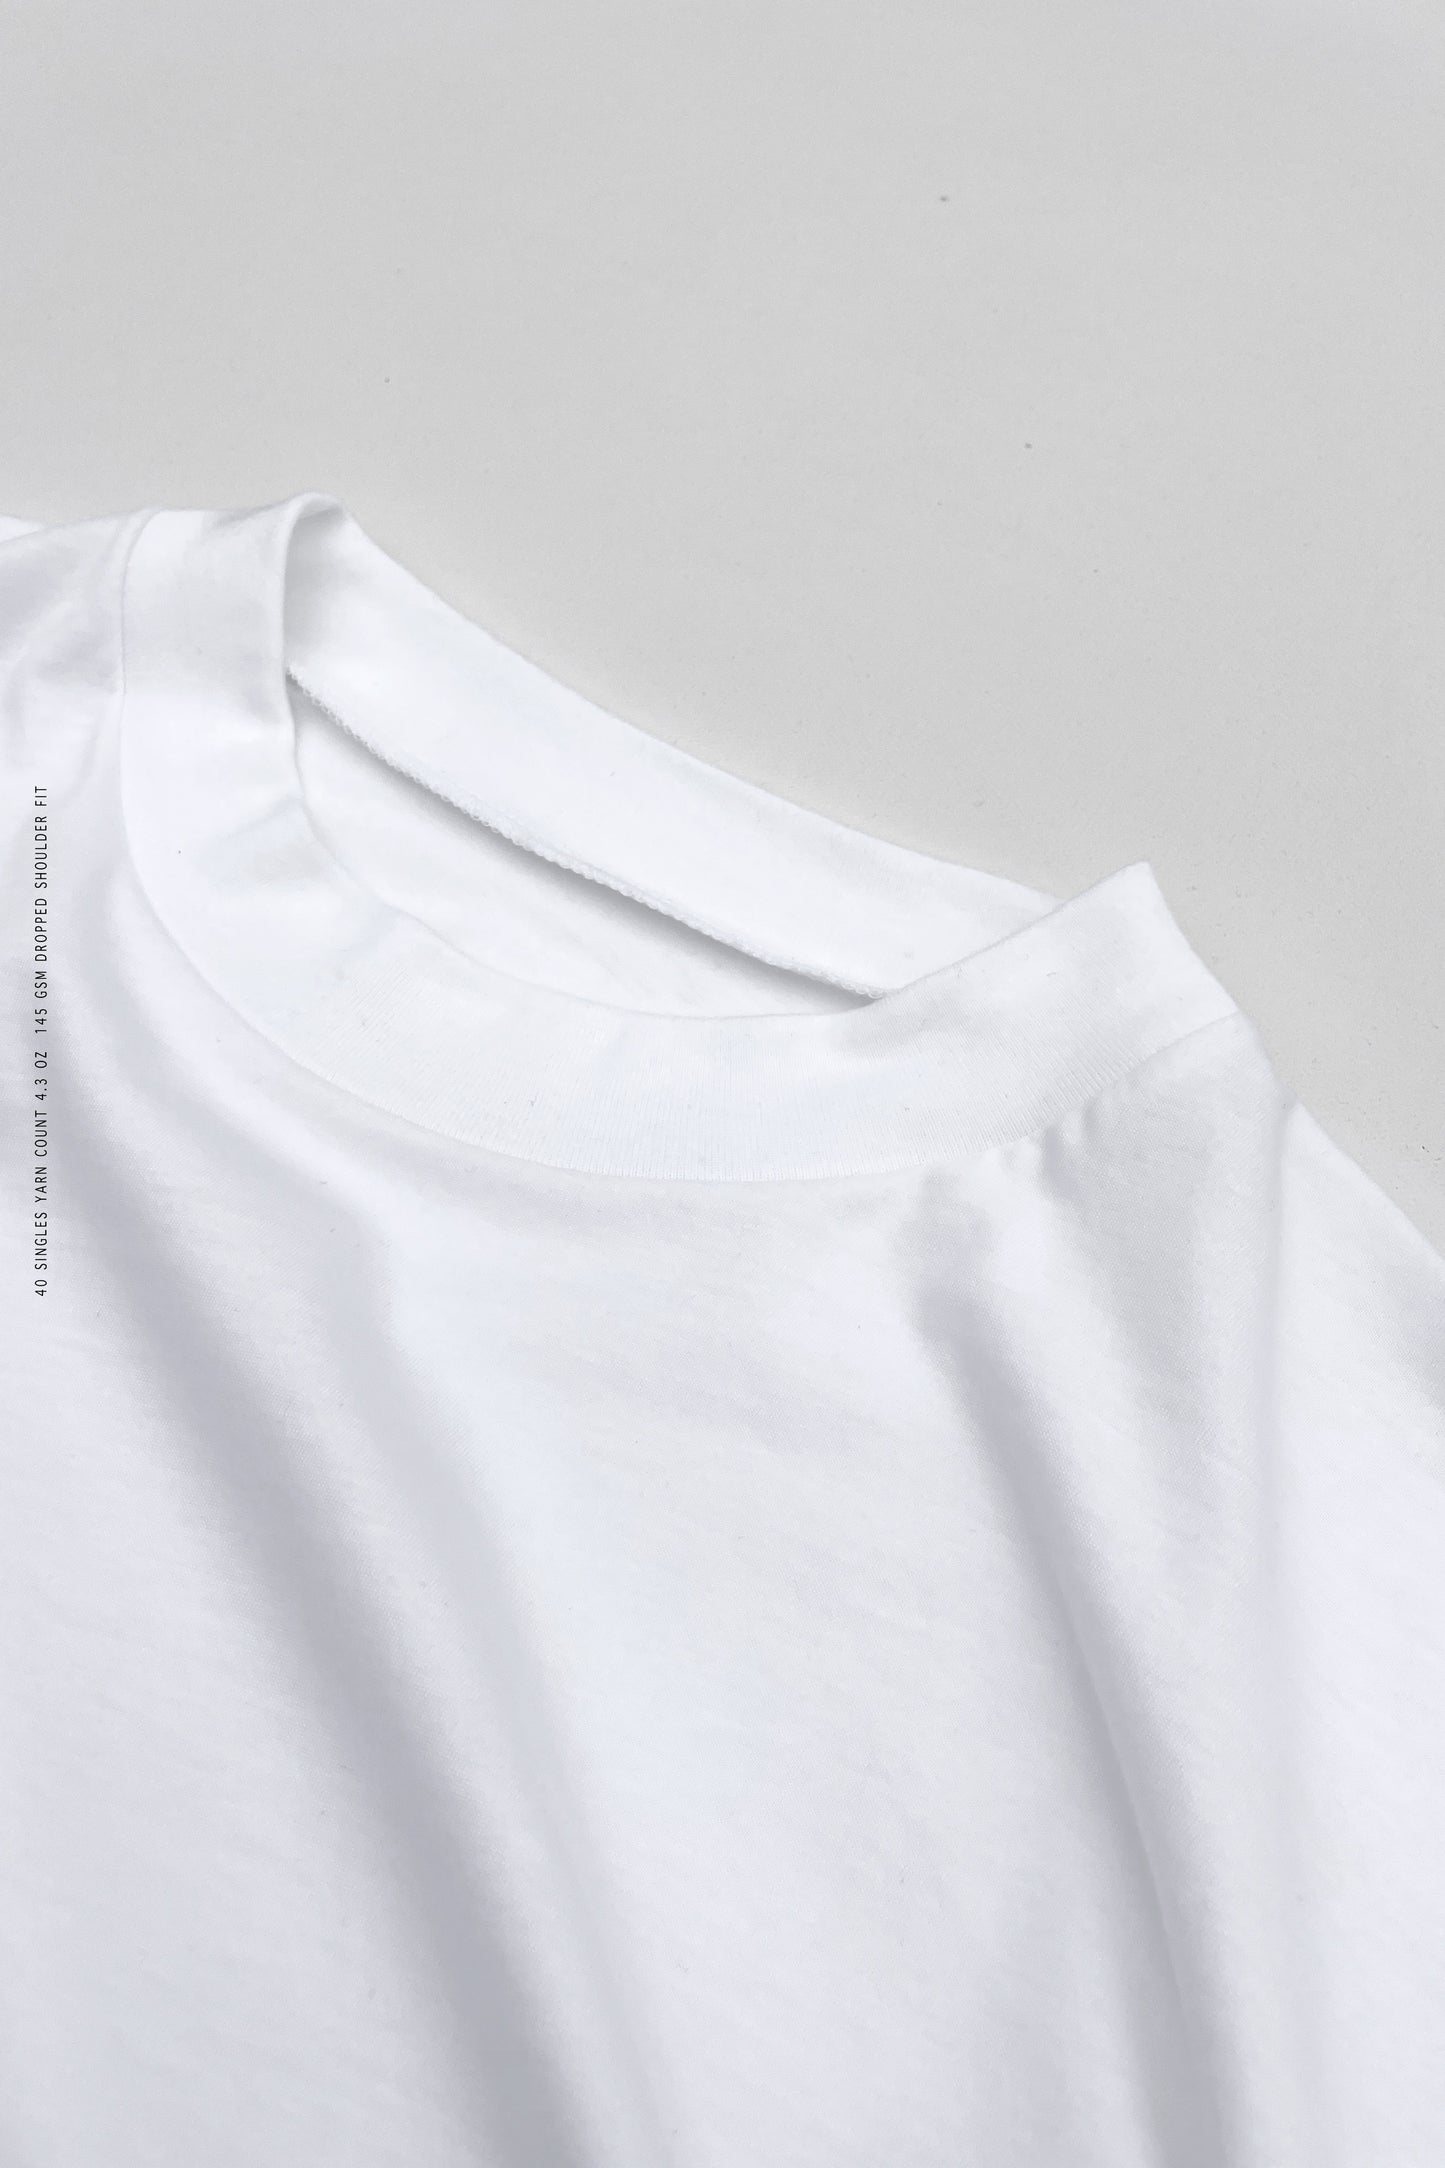 New "SILK" CROPPED White Blank